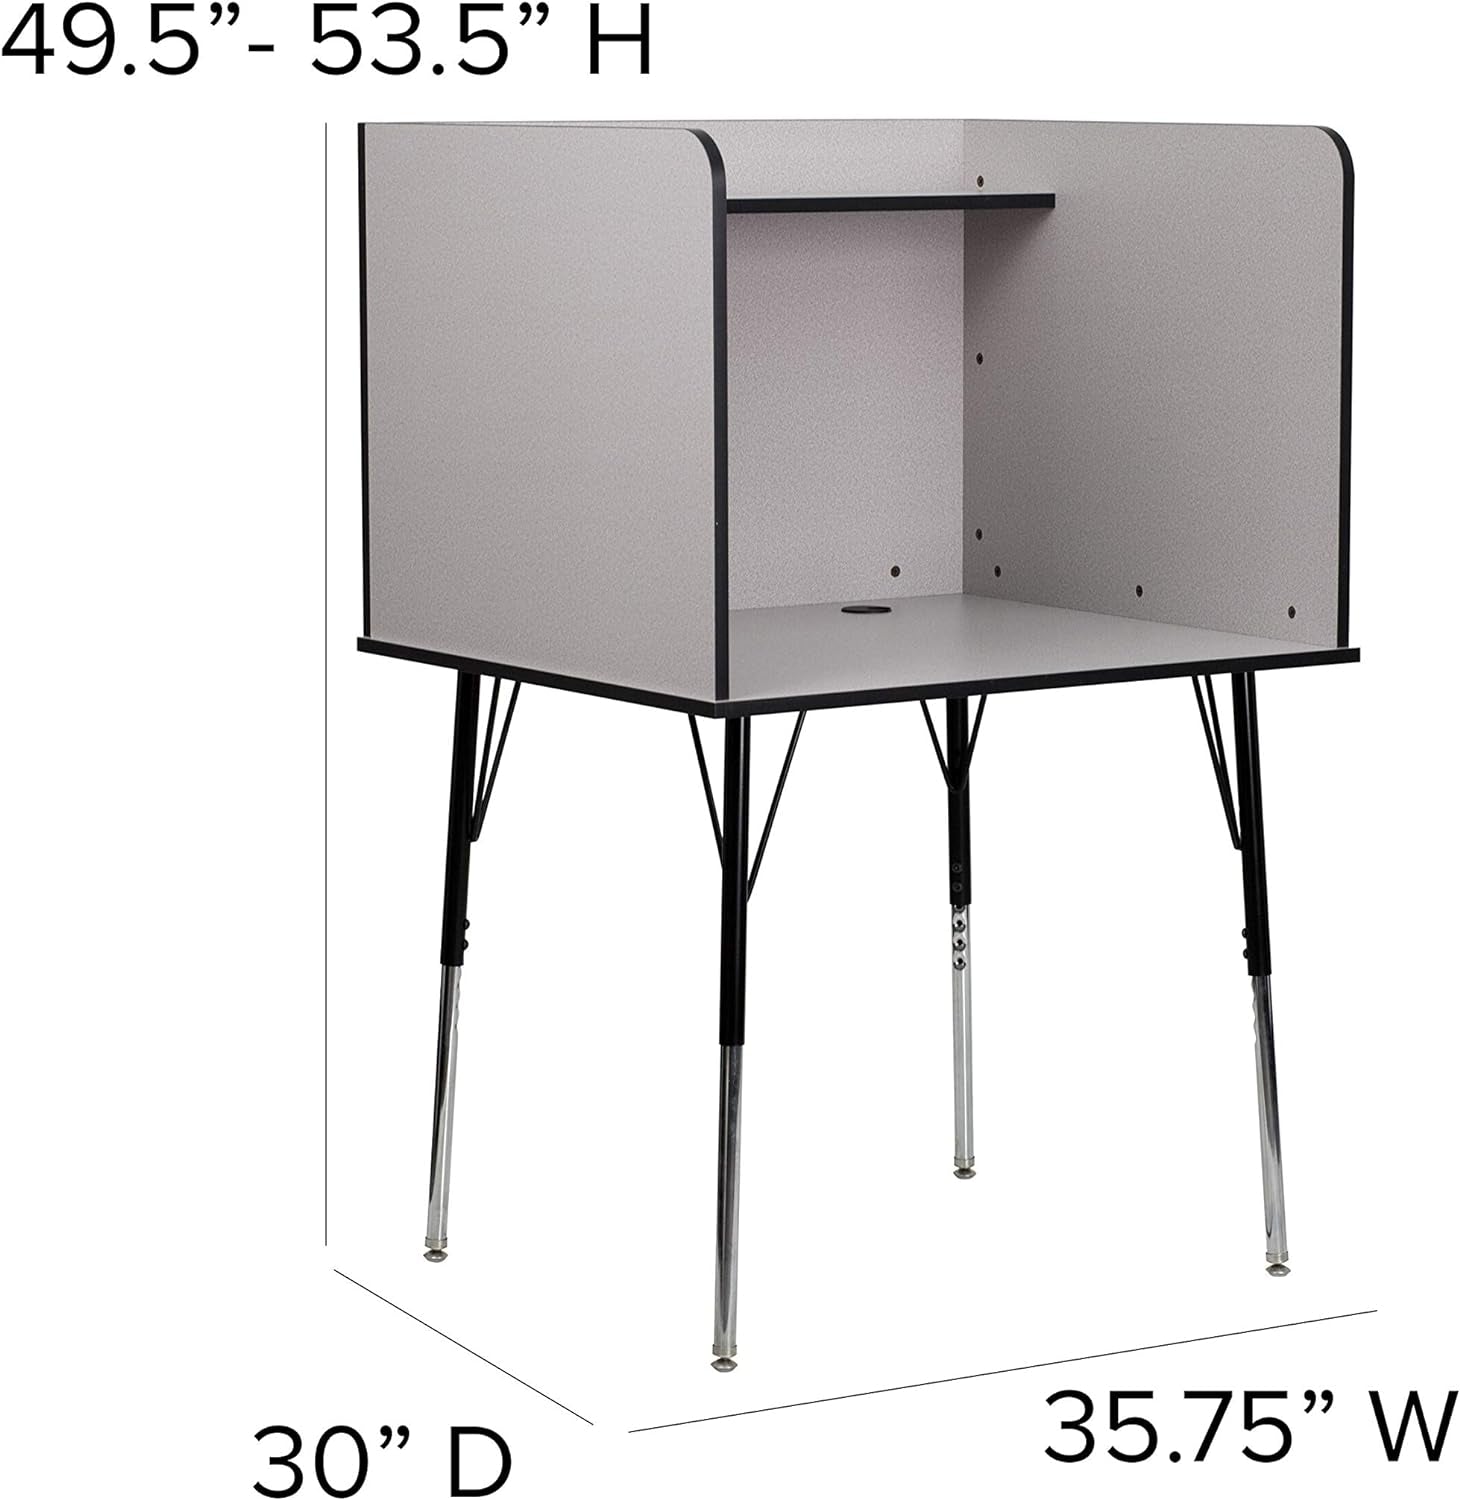 Study Carrel with Adjustable Legs and Top Shelf in Nebula Grey Finish